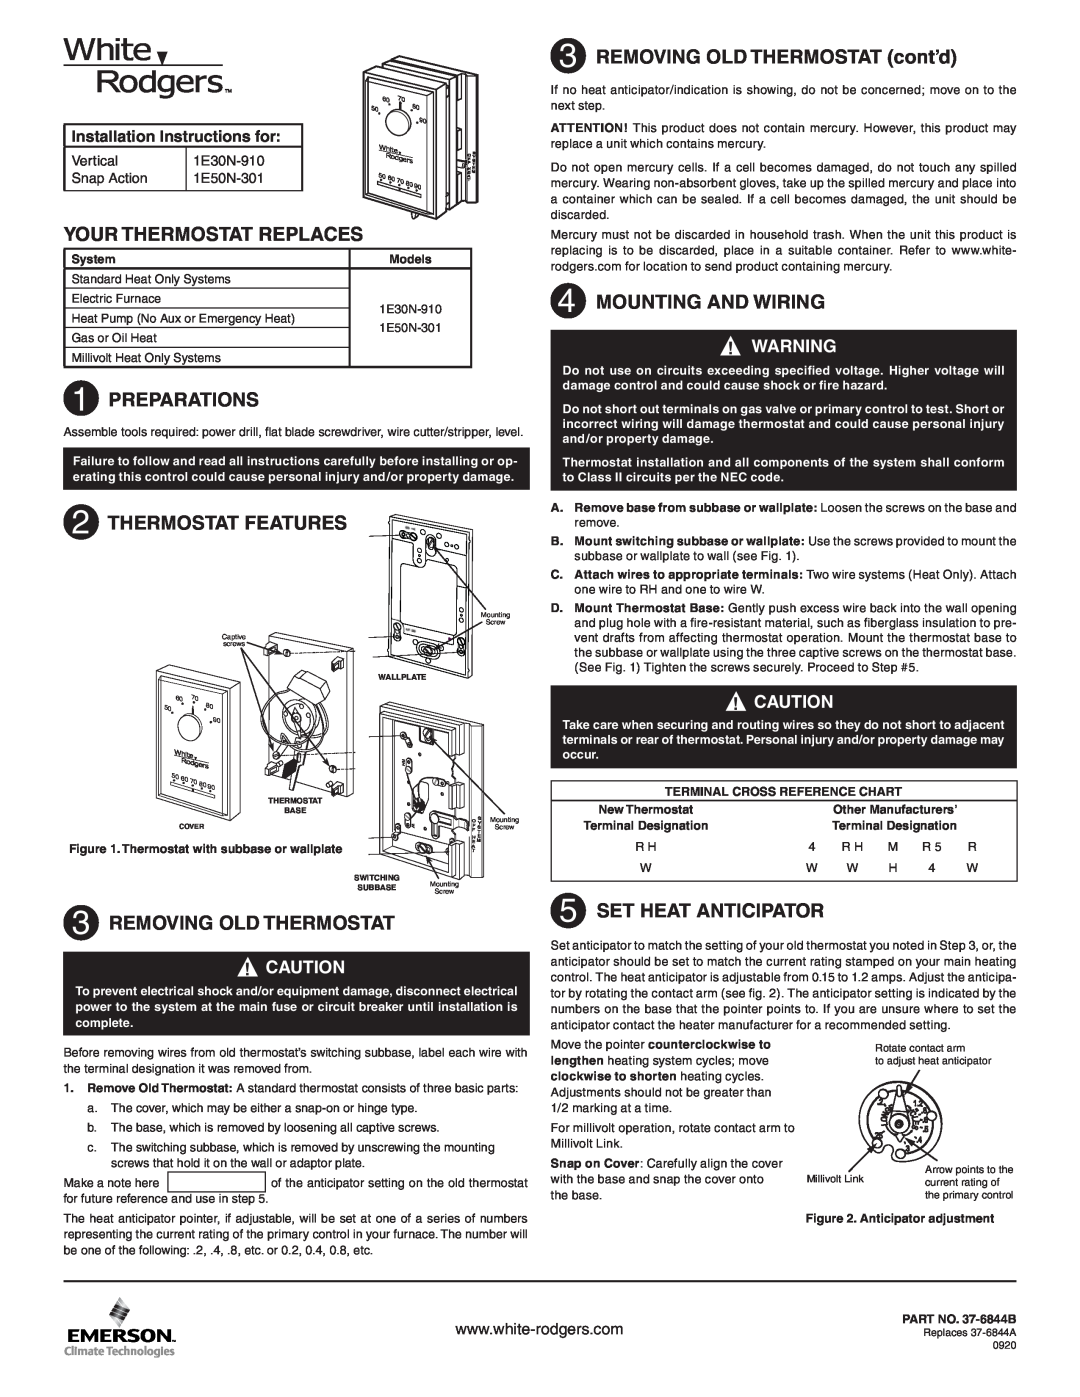 White Rodgers 1E30N-910 installation instructions REMOVING OLD THERMOSTAT cont’d, Your Thermostat Replaces, Preparations 